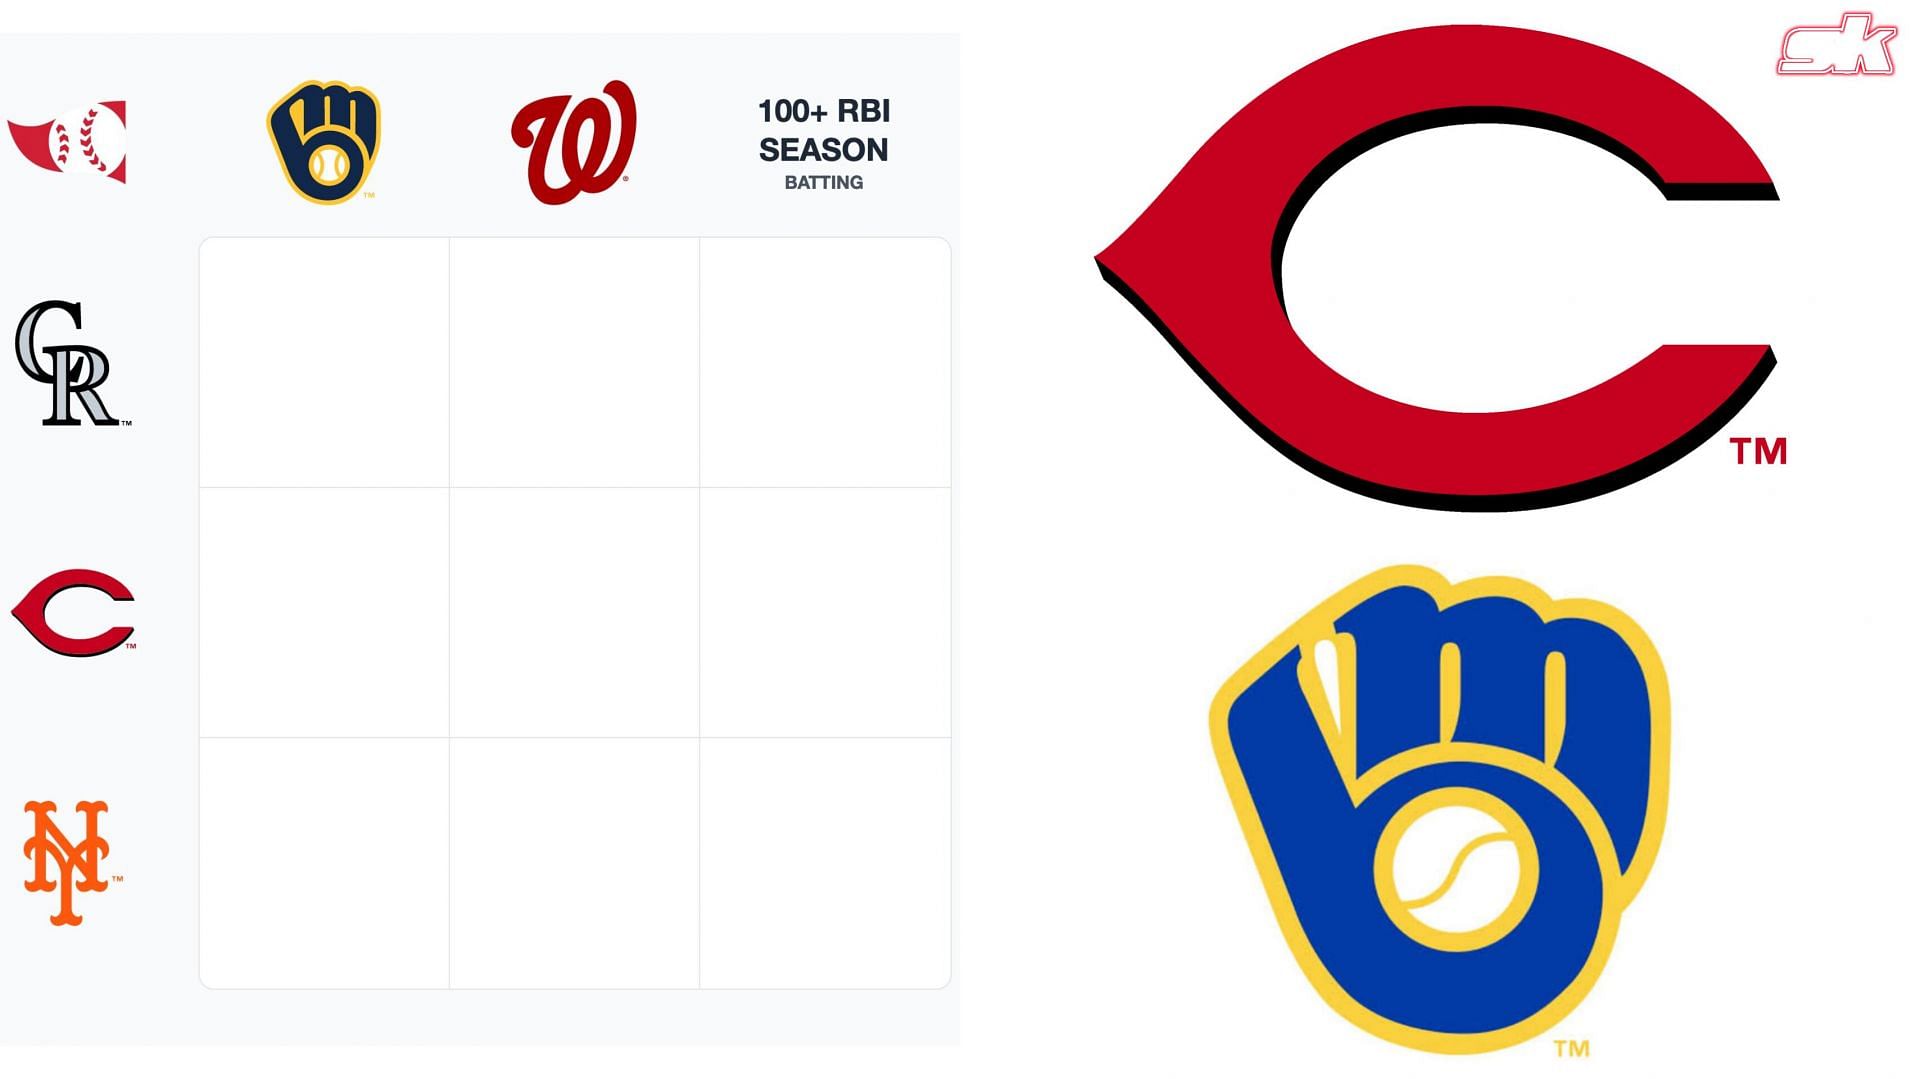 MLB Immaculate Grid August 18 answers Reds players to have also played for the Brewers 